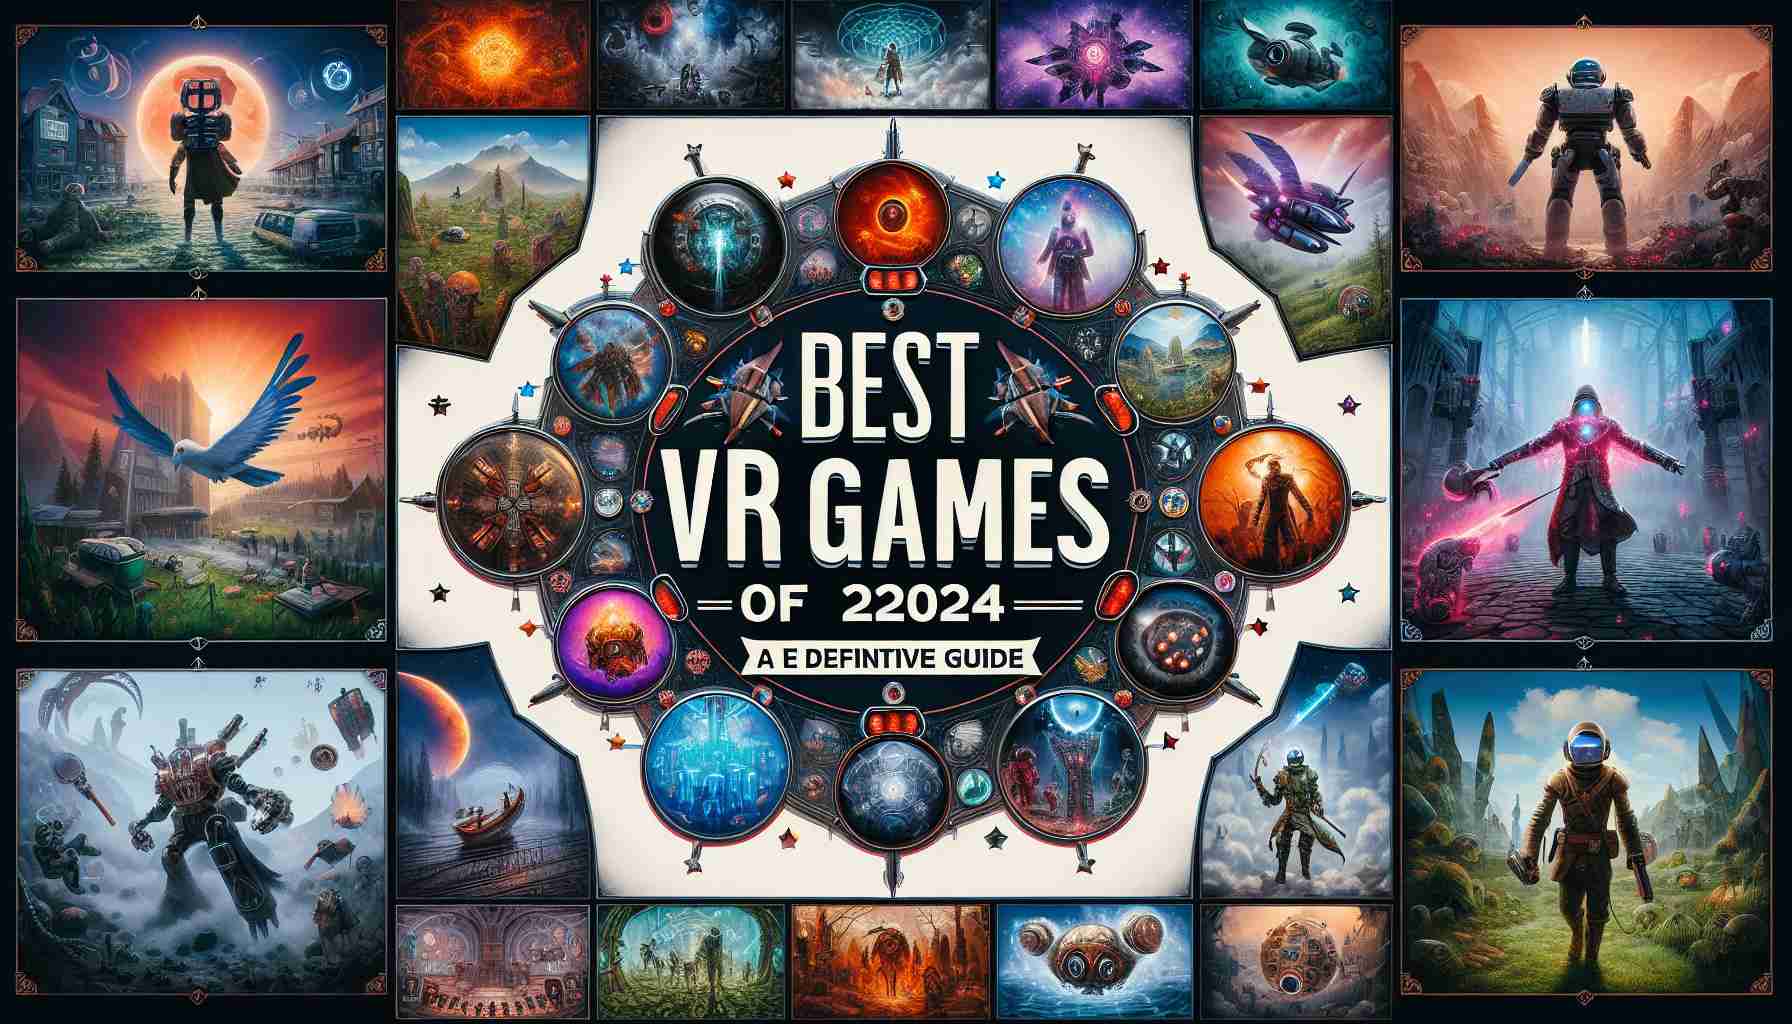 The 12 best VR games to play in 2023